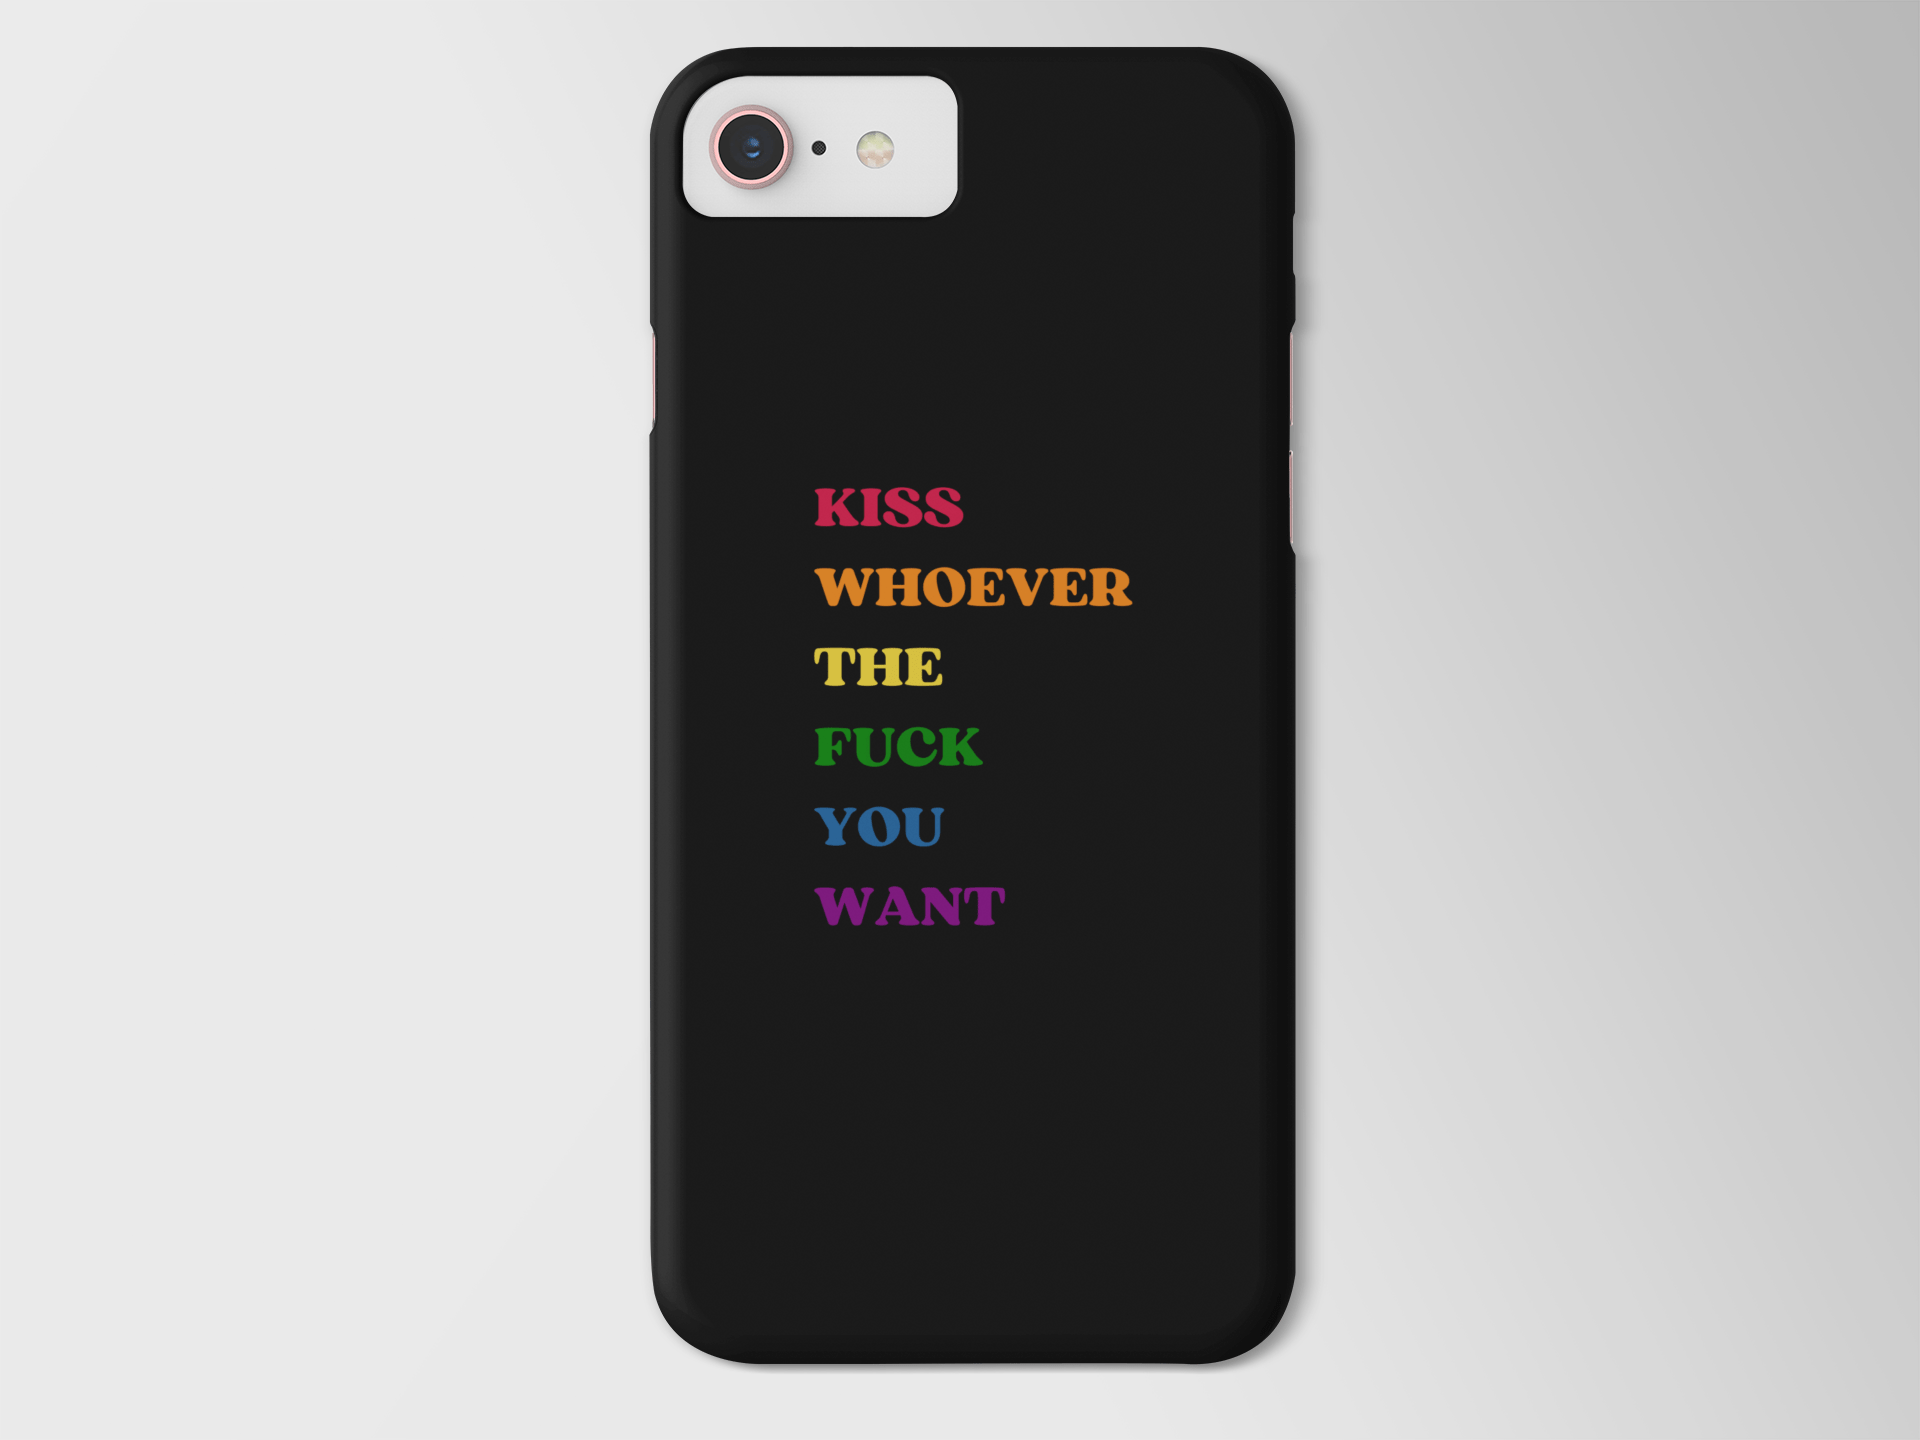 Kiss Whoever the F*ck You Want Gay Pride Kiss-Cut Sticker - beyourownherodesign